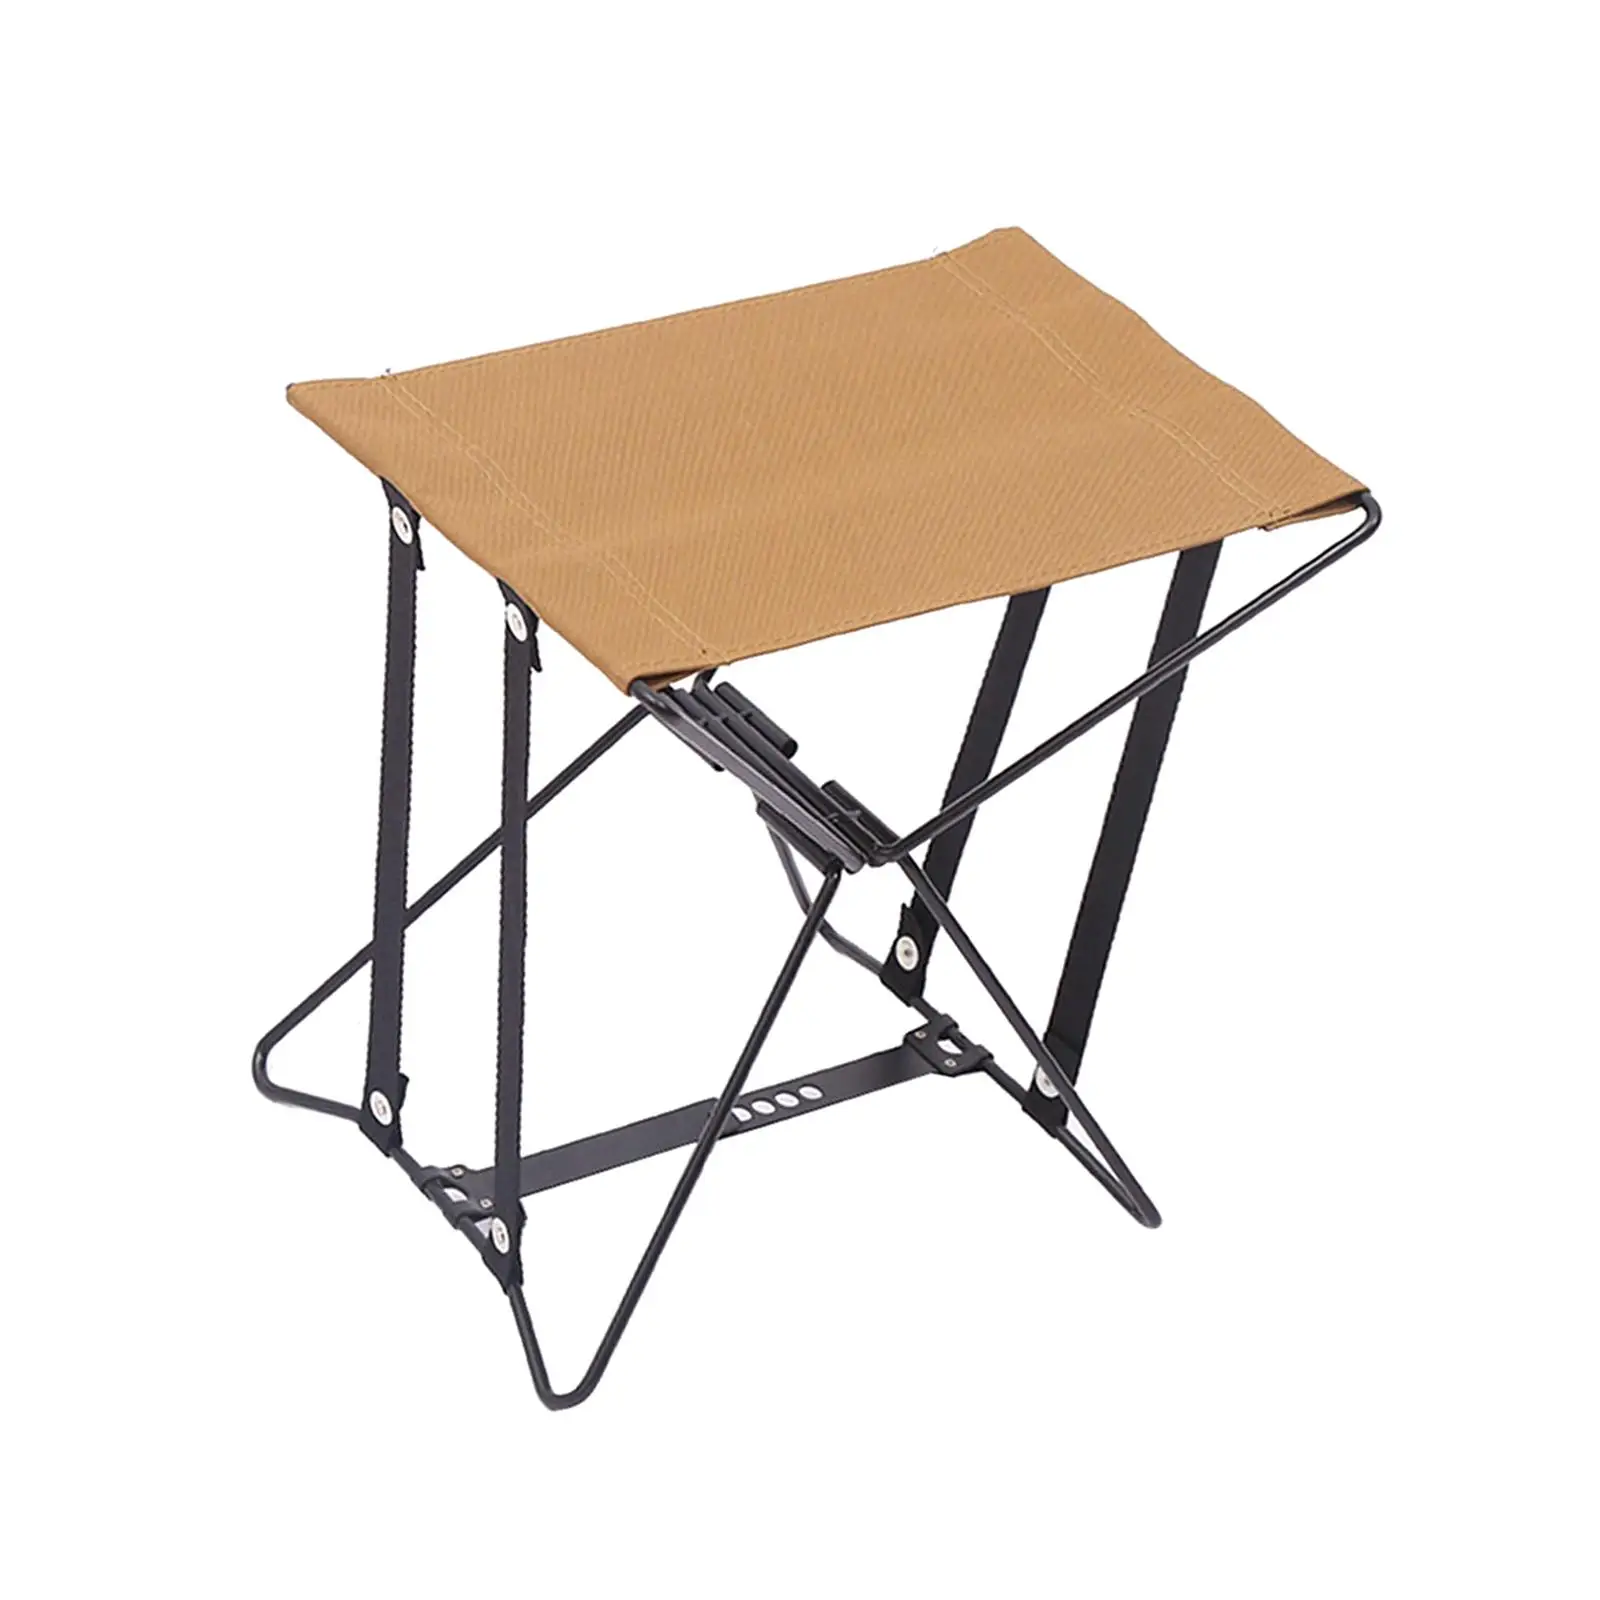 Portable Folding Stool Seat Camping Stool for Gardening Lawn Backpacking